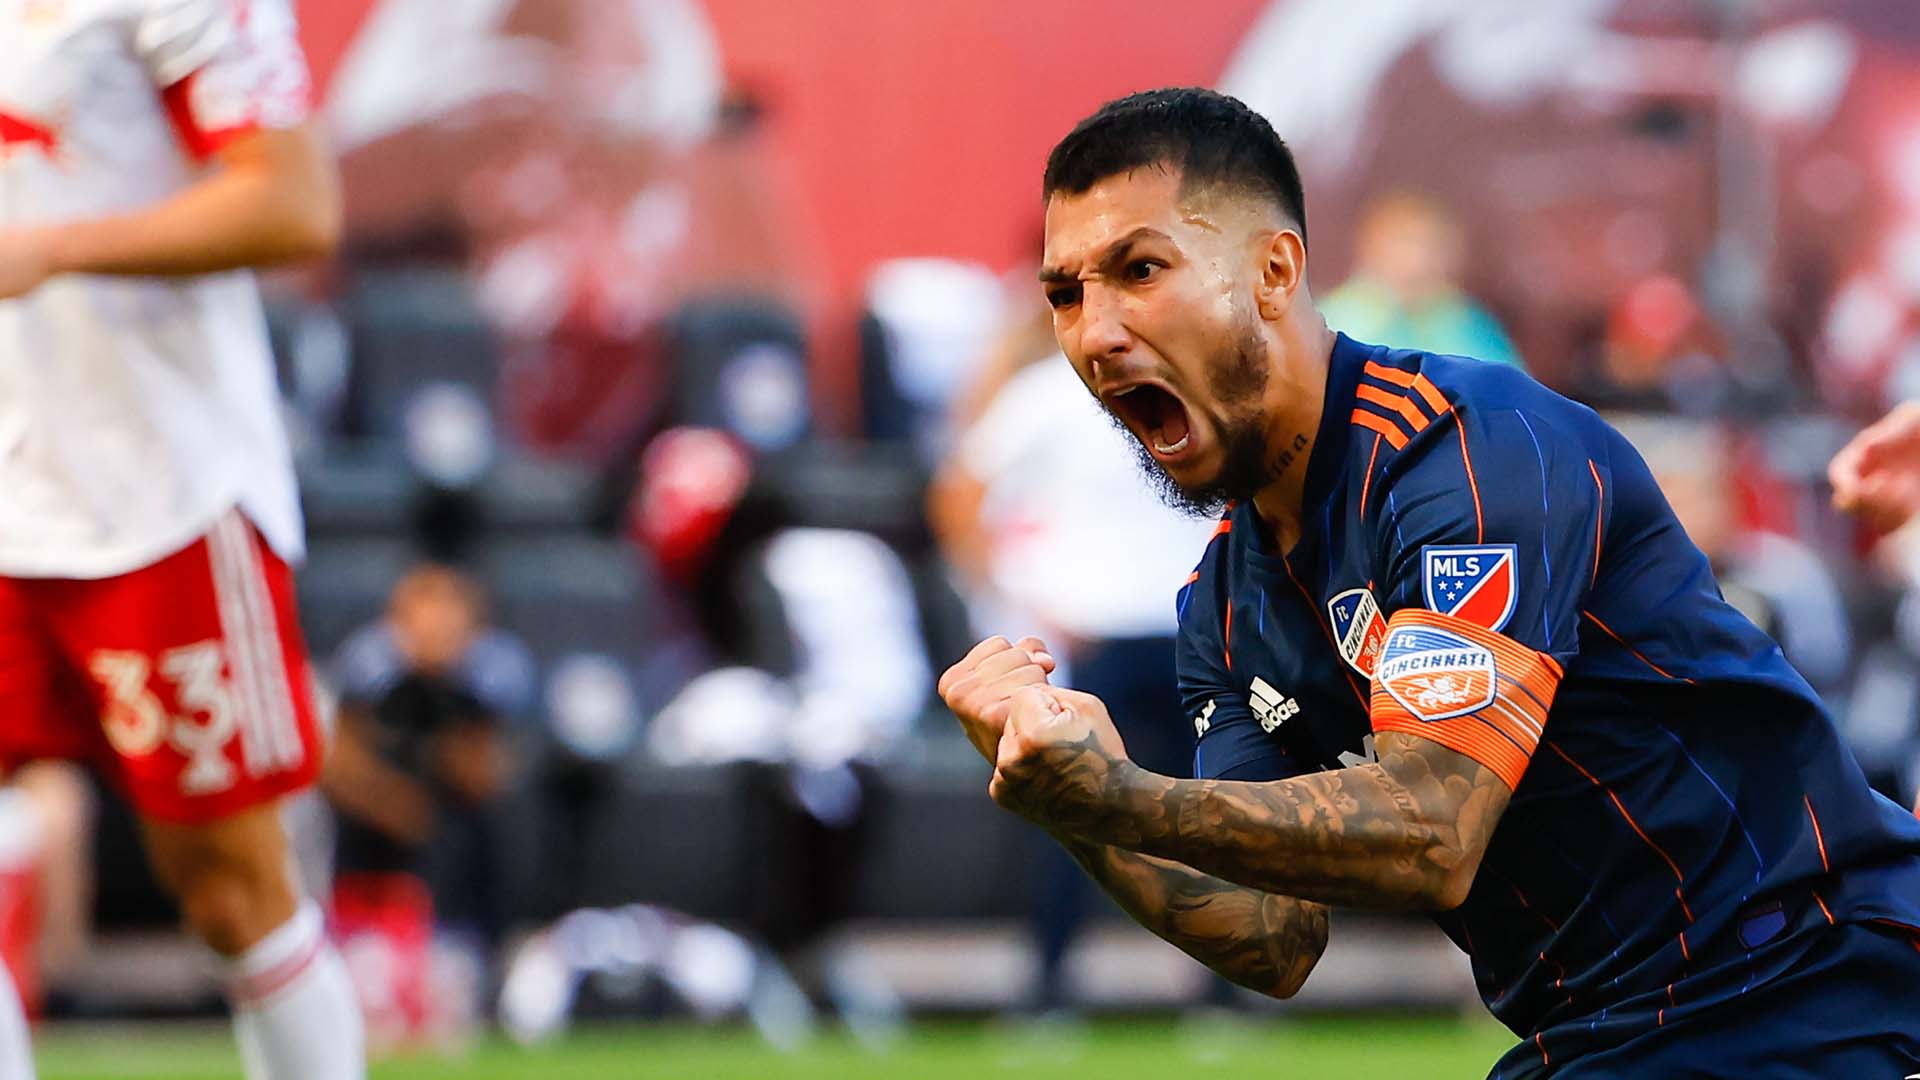 Interest from Europe. In 2019, he was on the radar of teams like Sevilla and PSG as his contract with DC United was ending, but he ultimately joined Atlas.